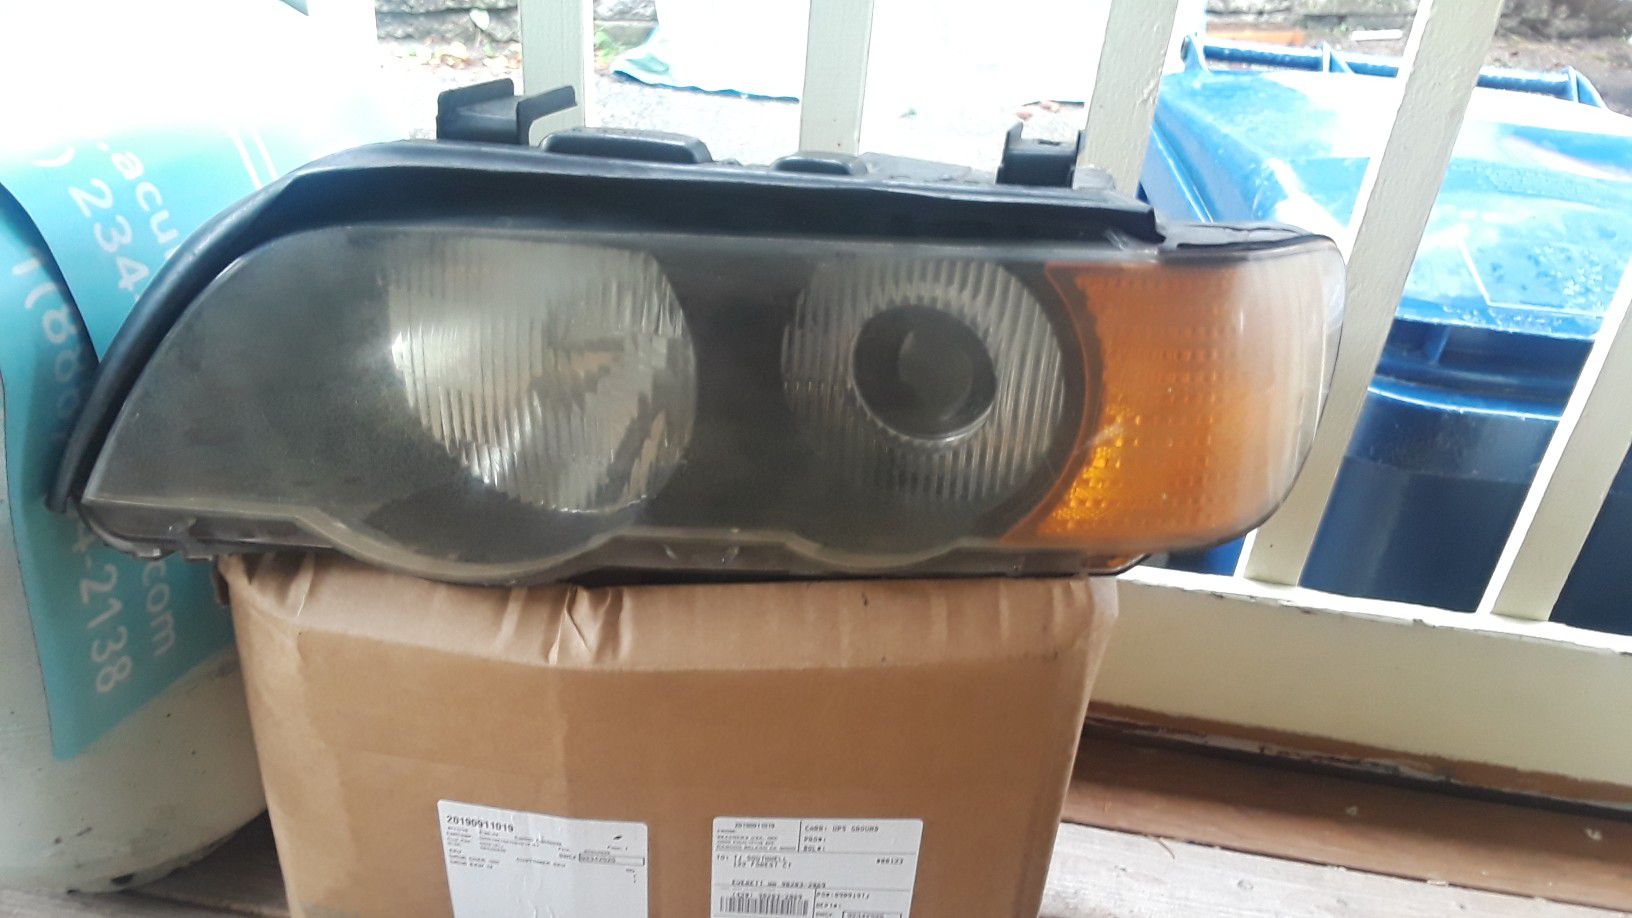 X5 bmw2002 head light ($150) ,lawnmower ($220) and tent 2 roon ($70)